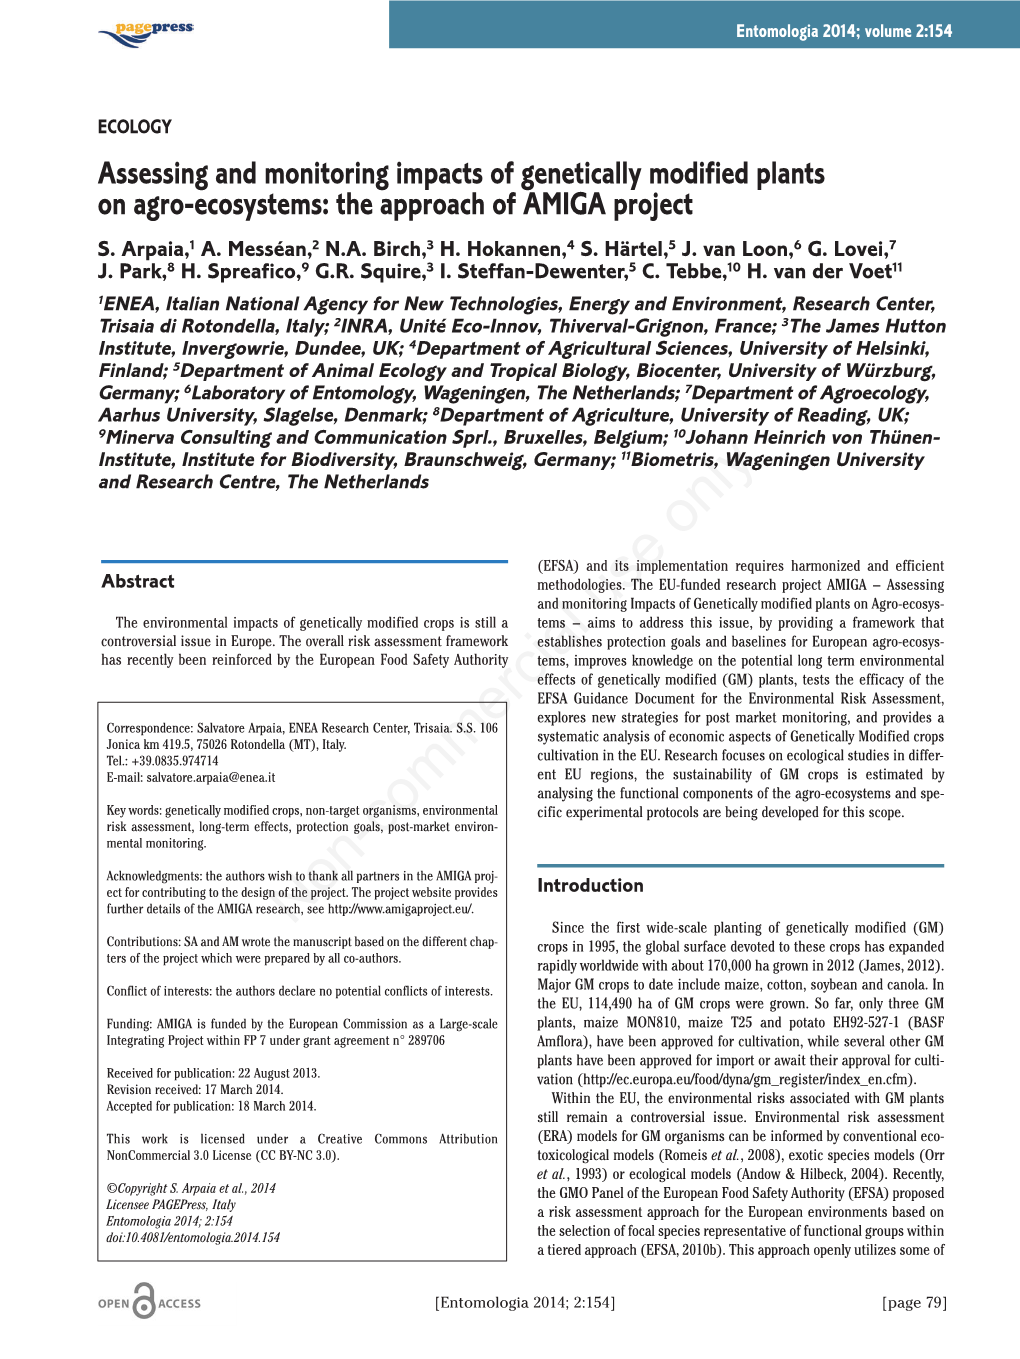 Assessing and Monitoring Impacts of Genetically Modified Plants on Agro-Ecosystems: the Approach of AMIGA Project S